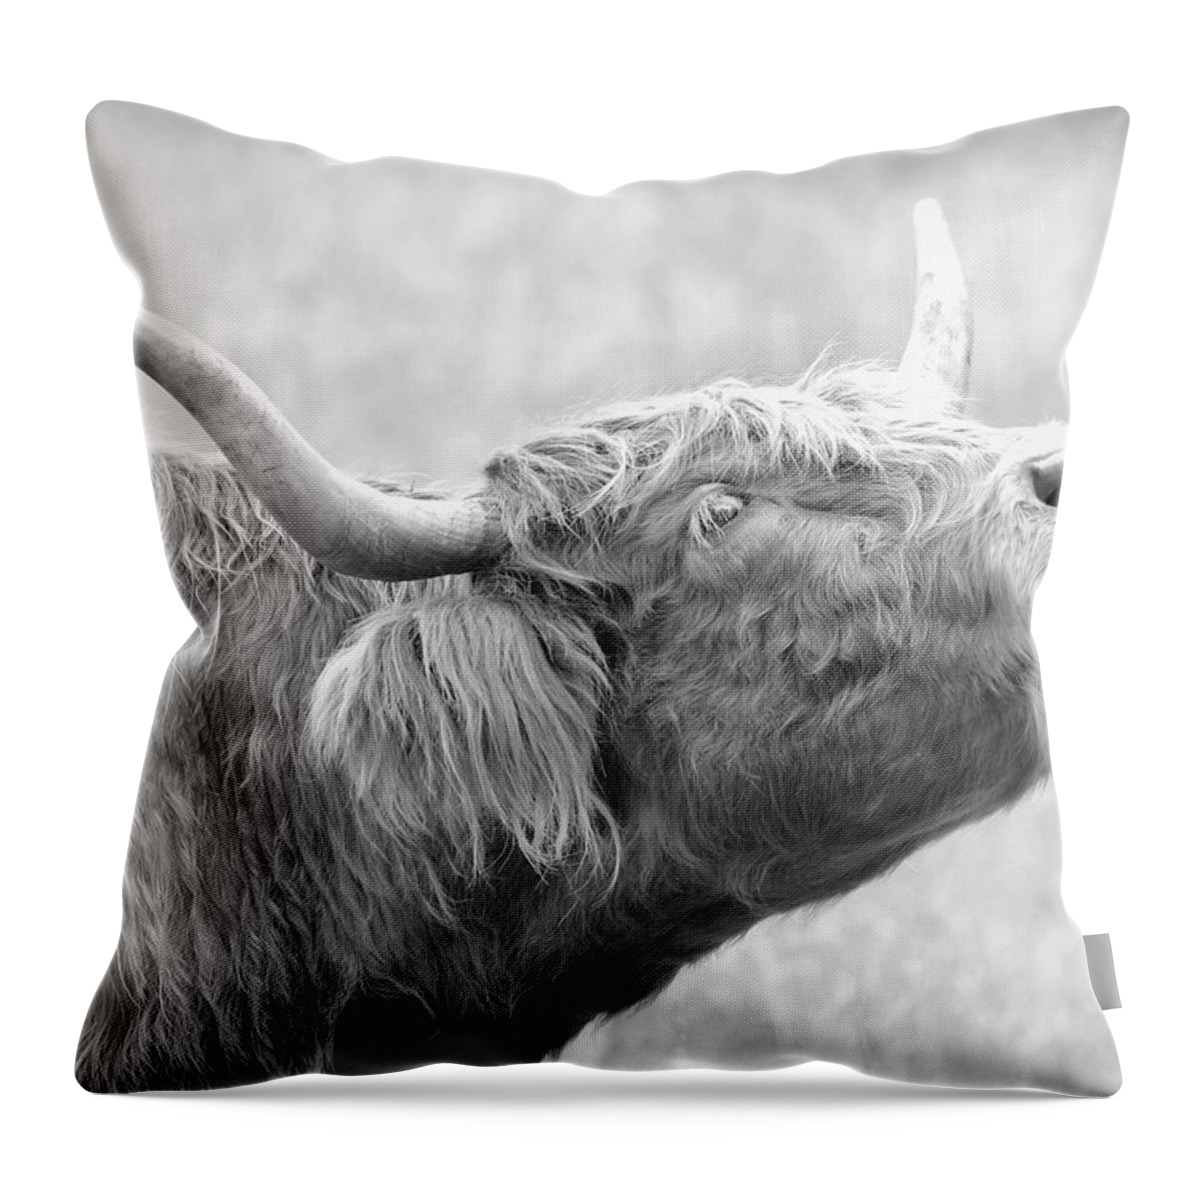 Highland Cow Throw Pillow featuring the photograph Scottish Bull Call by Steve McKinzie